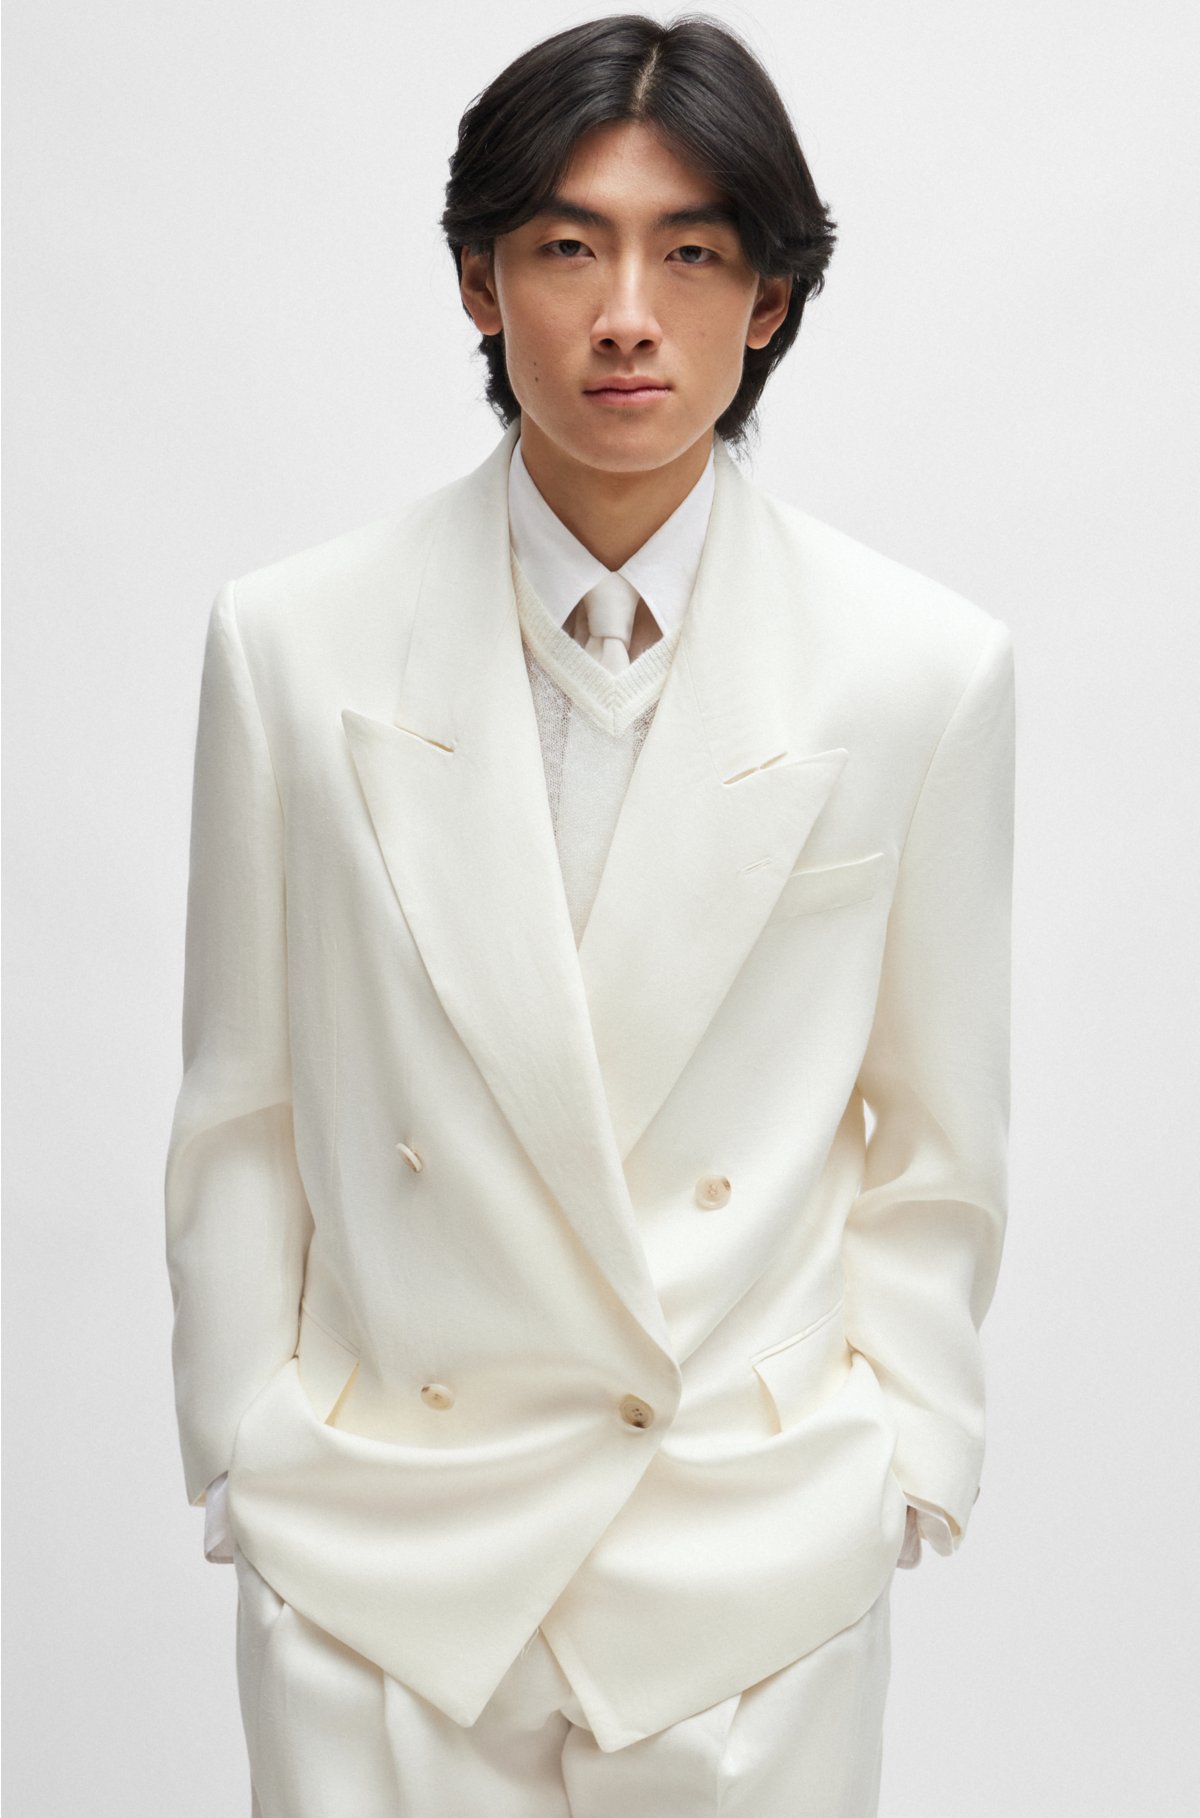 Relaxed-fit jacket in micro-patterned linen, White